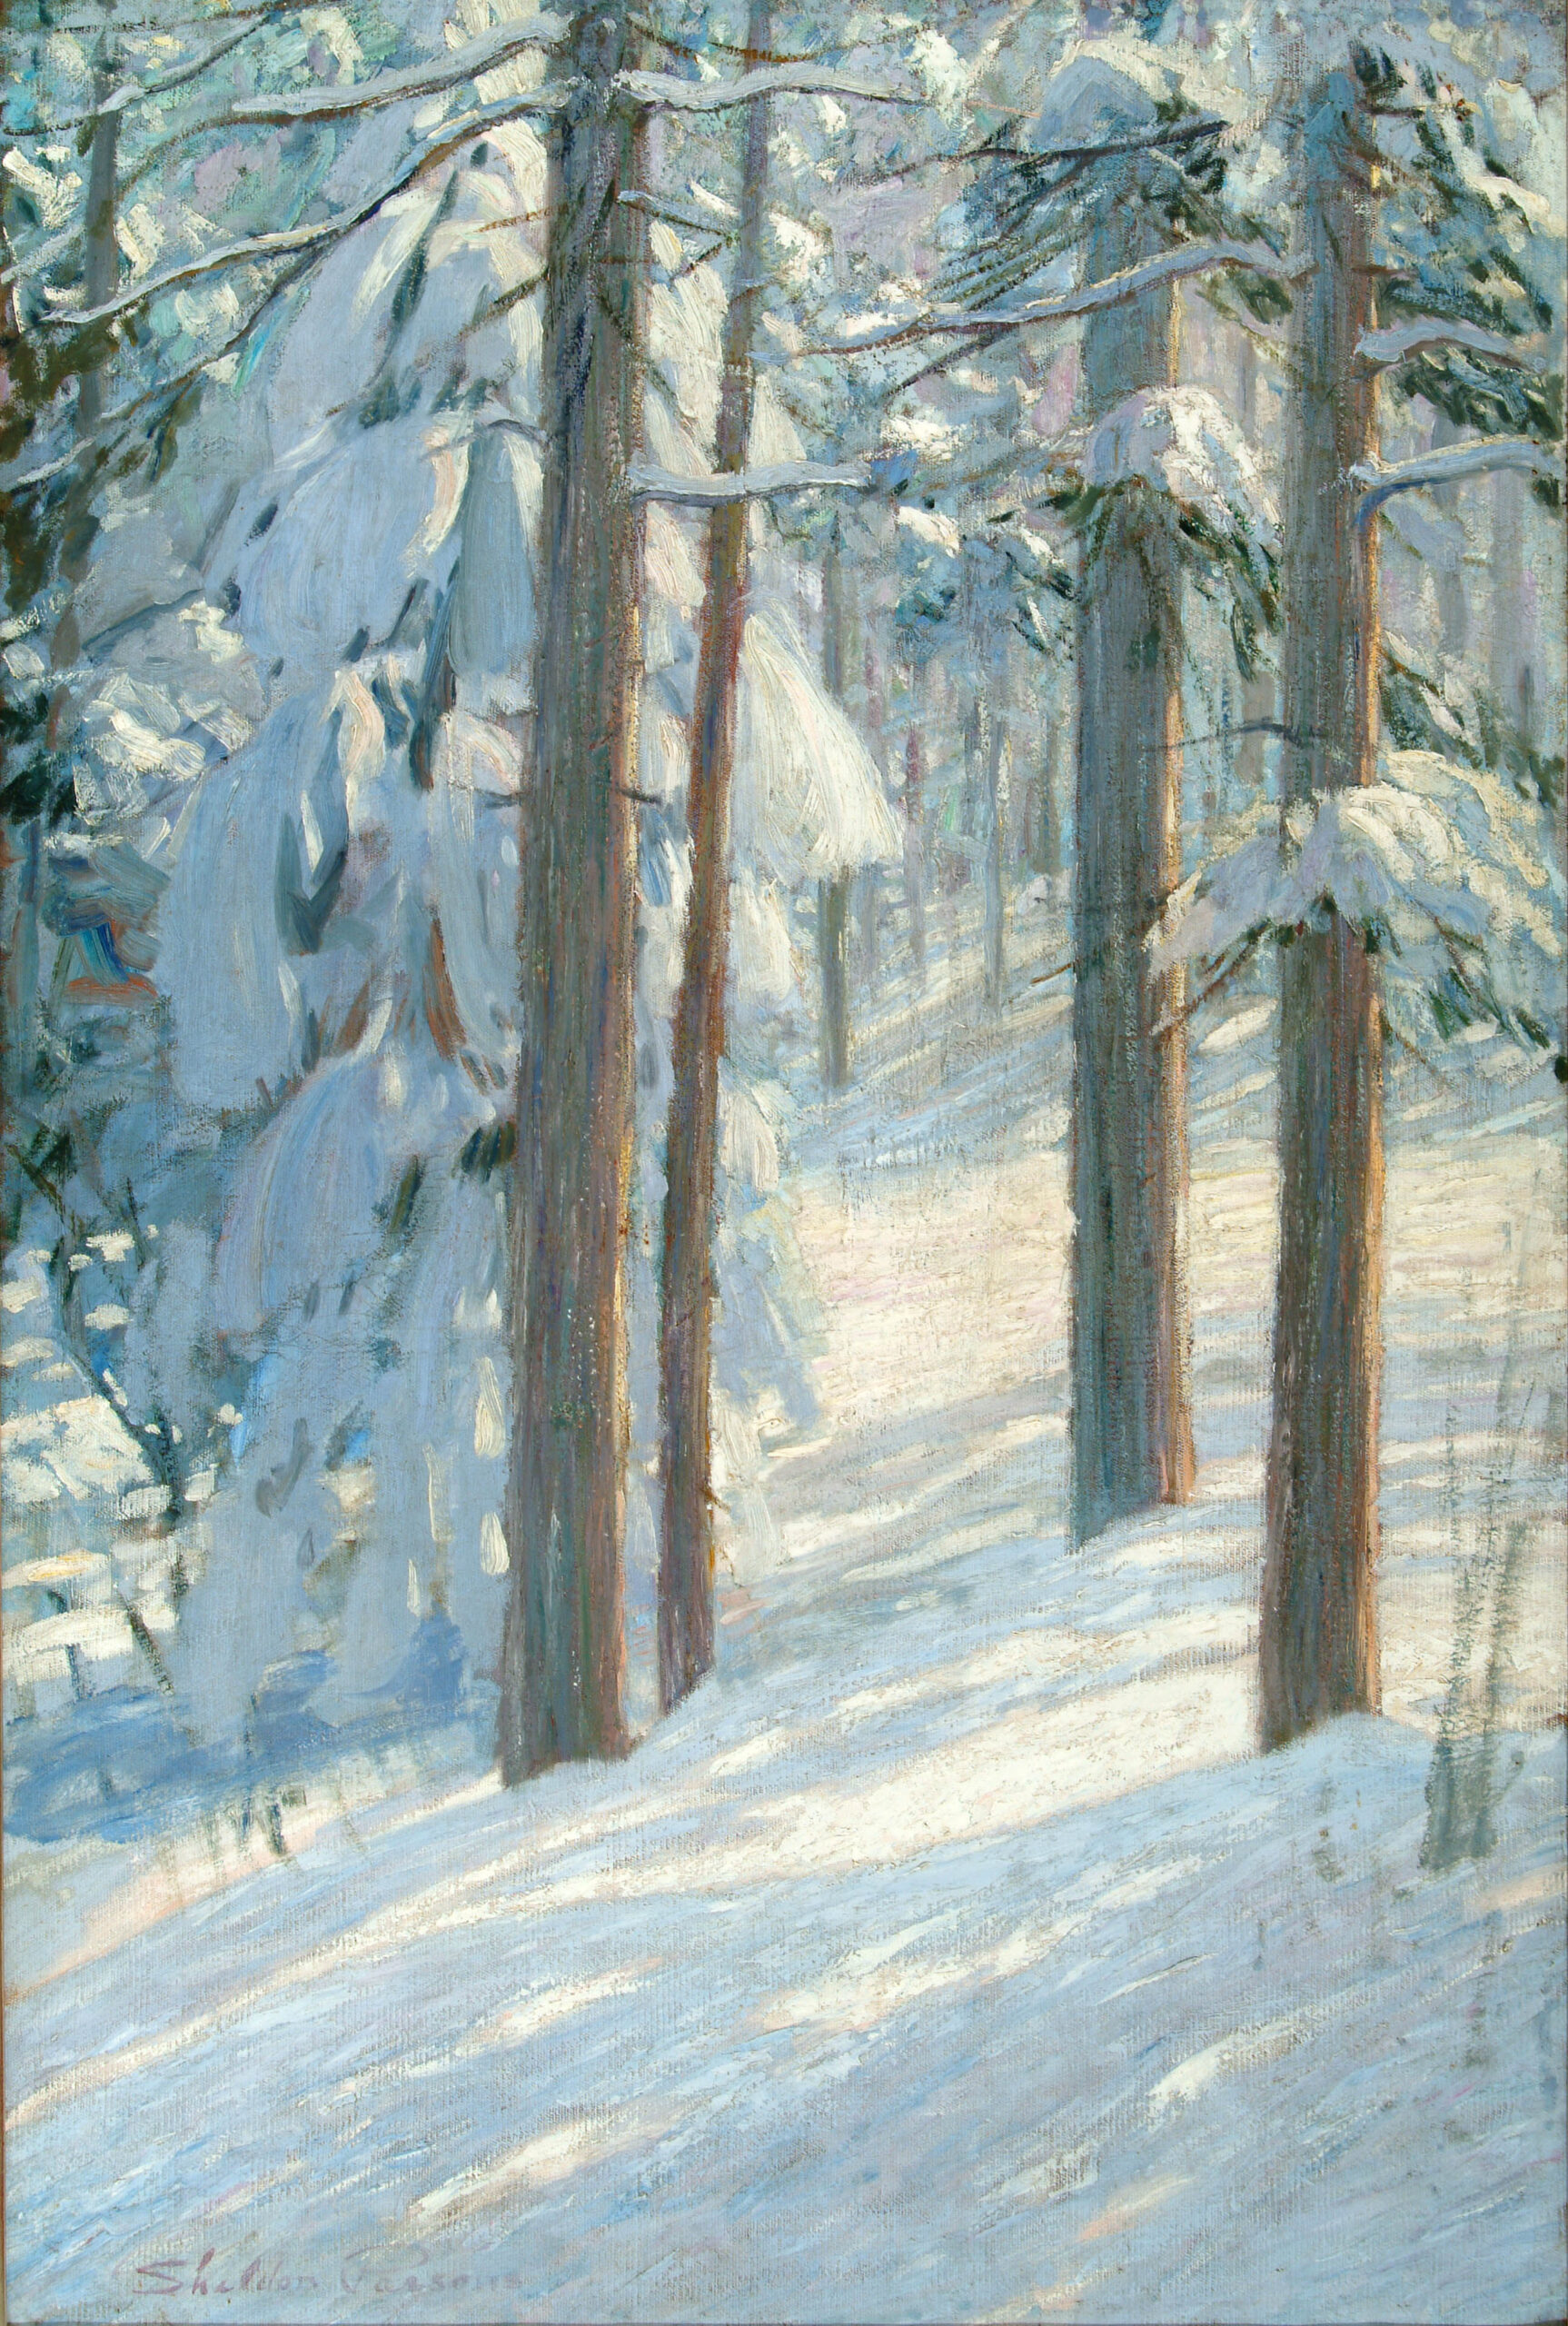 ORRIN SHELDON PARSONS (1866-1943) Winter Woods (before 1913), oil on canvas, 44 x 40 inches